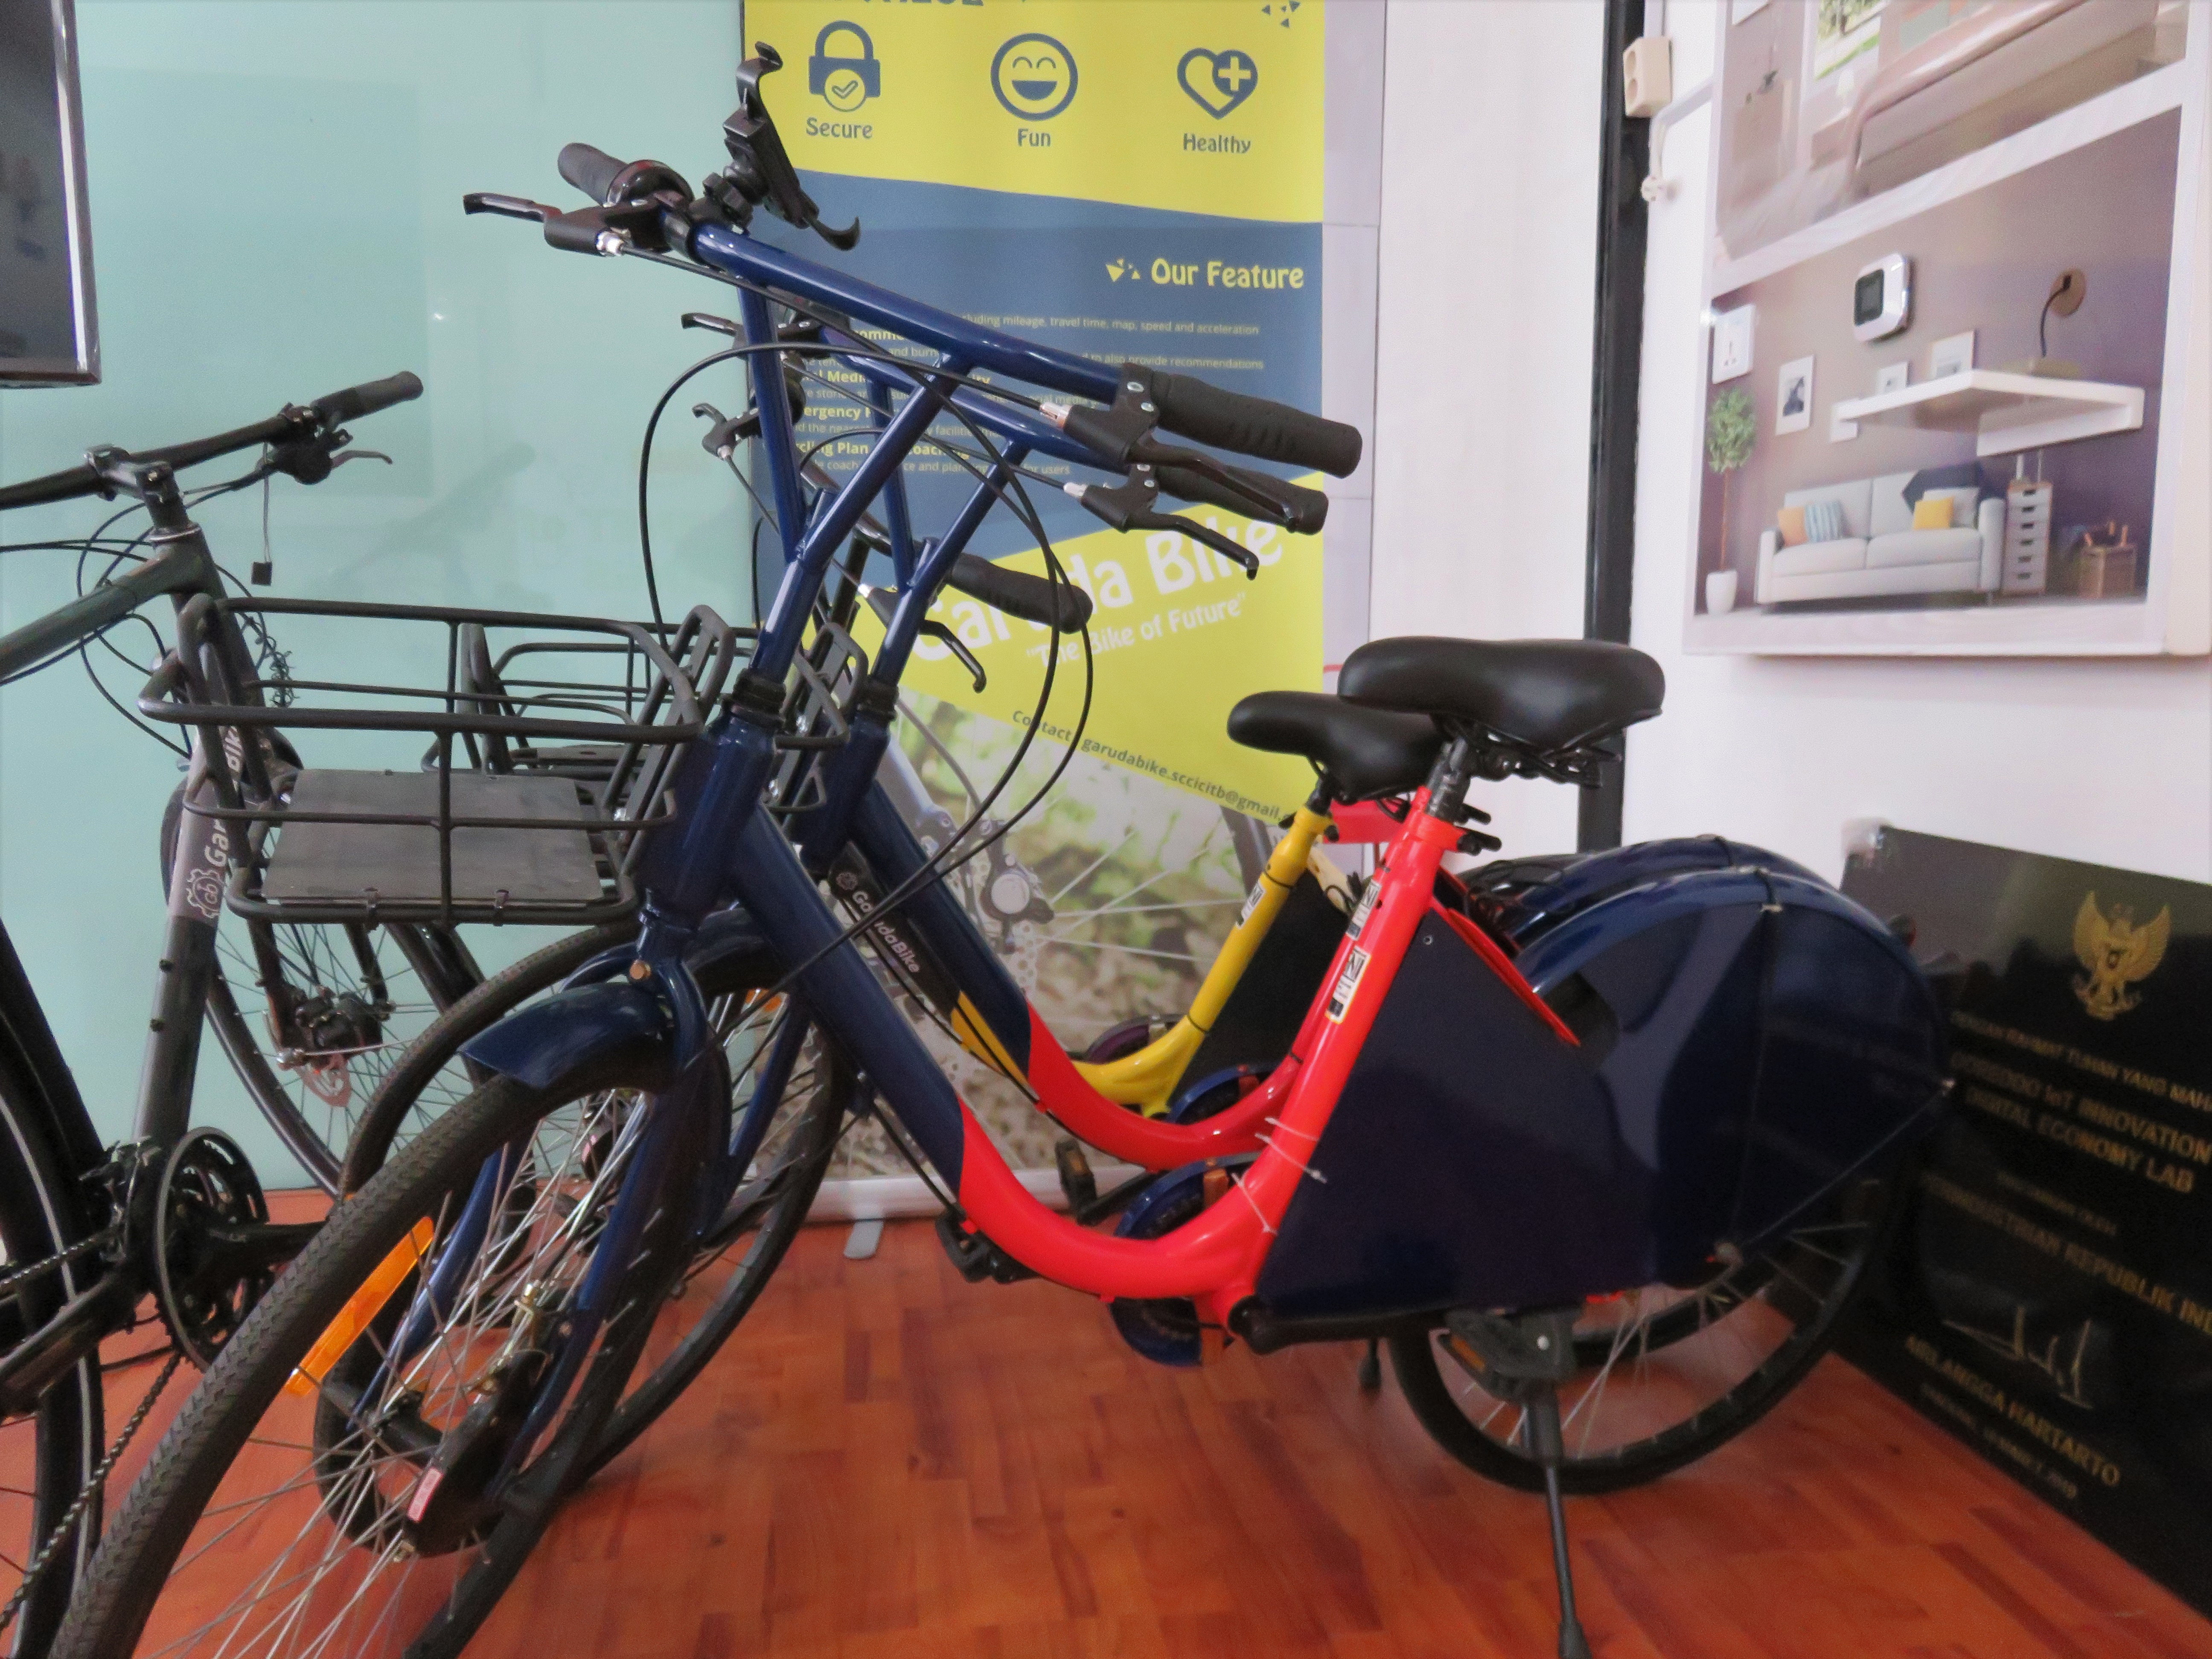 garuda-bike-a-touch-of-iot-to-cycling-developed-by-itb